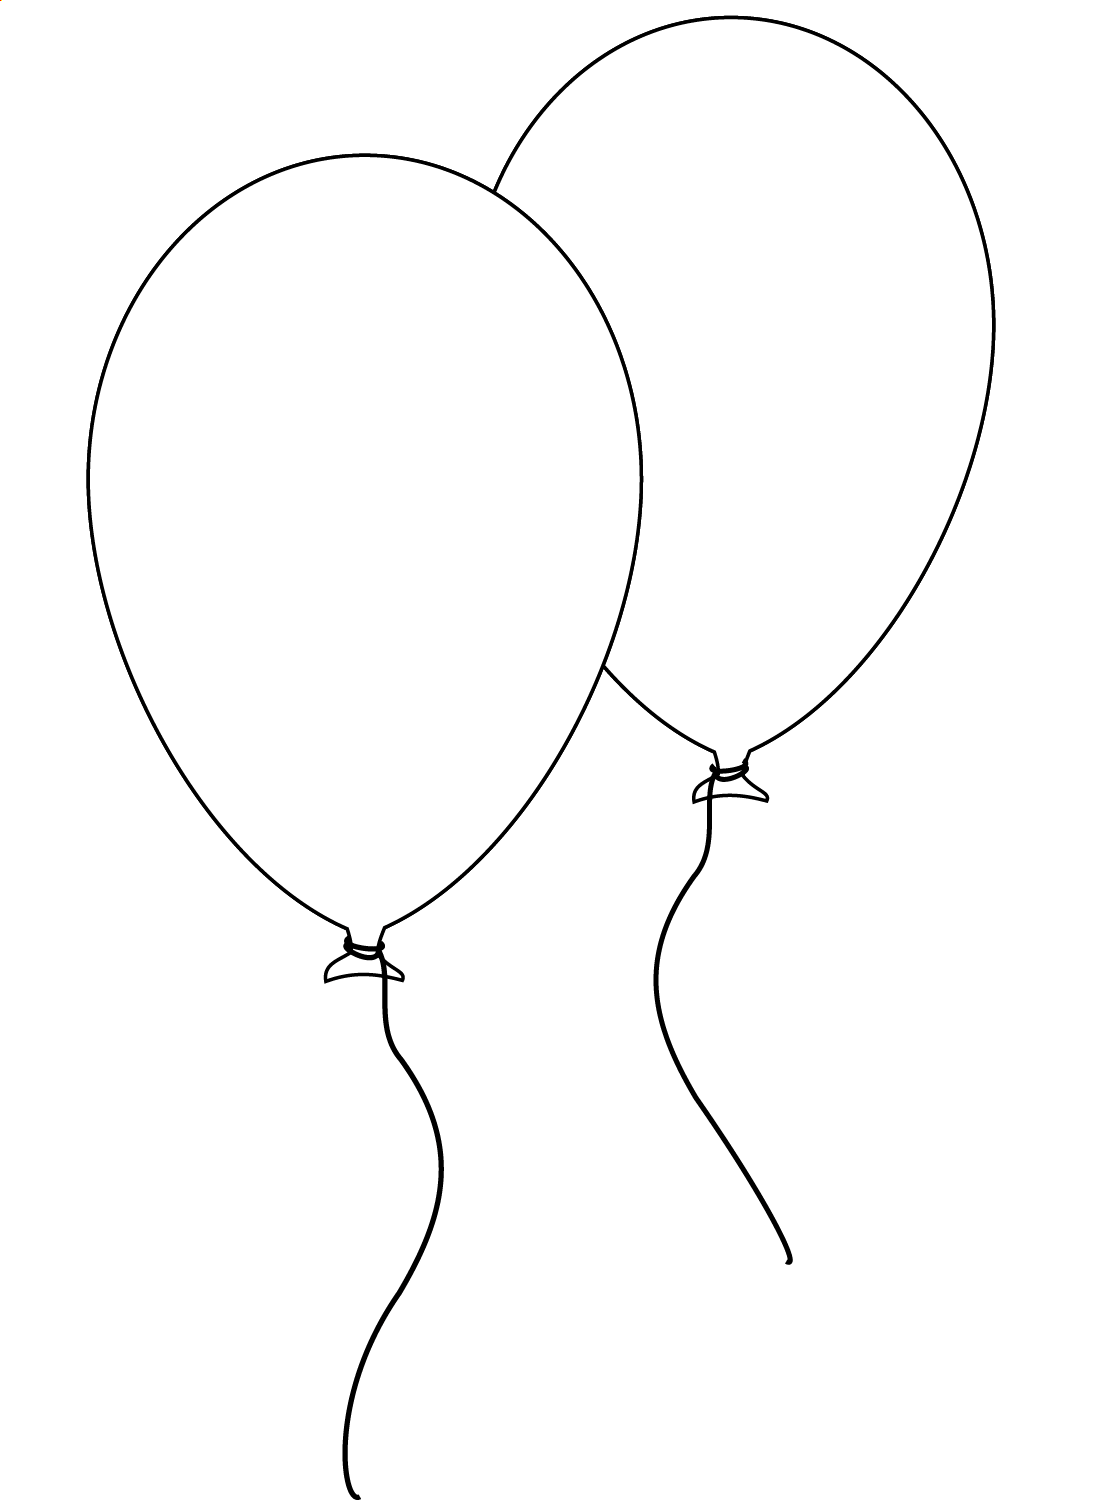 Two Balloons Coloring Page